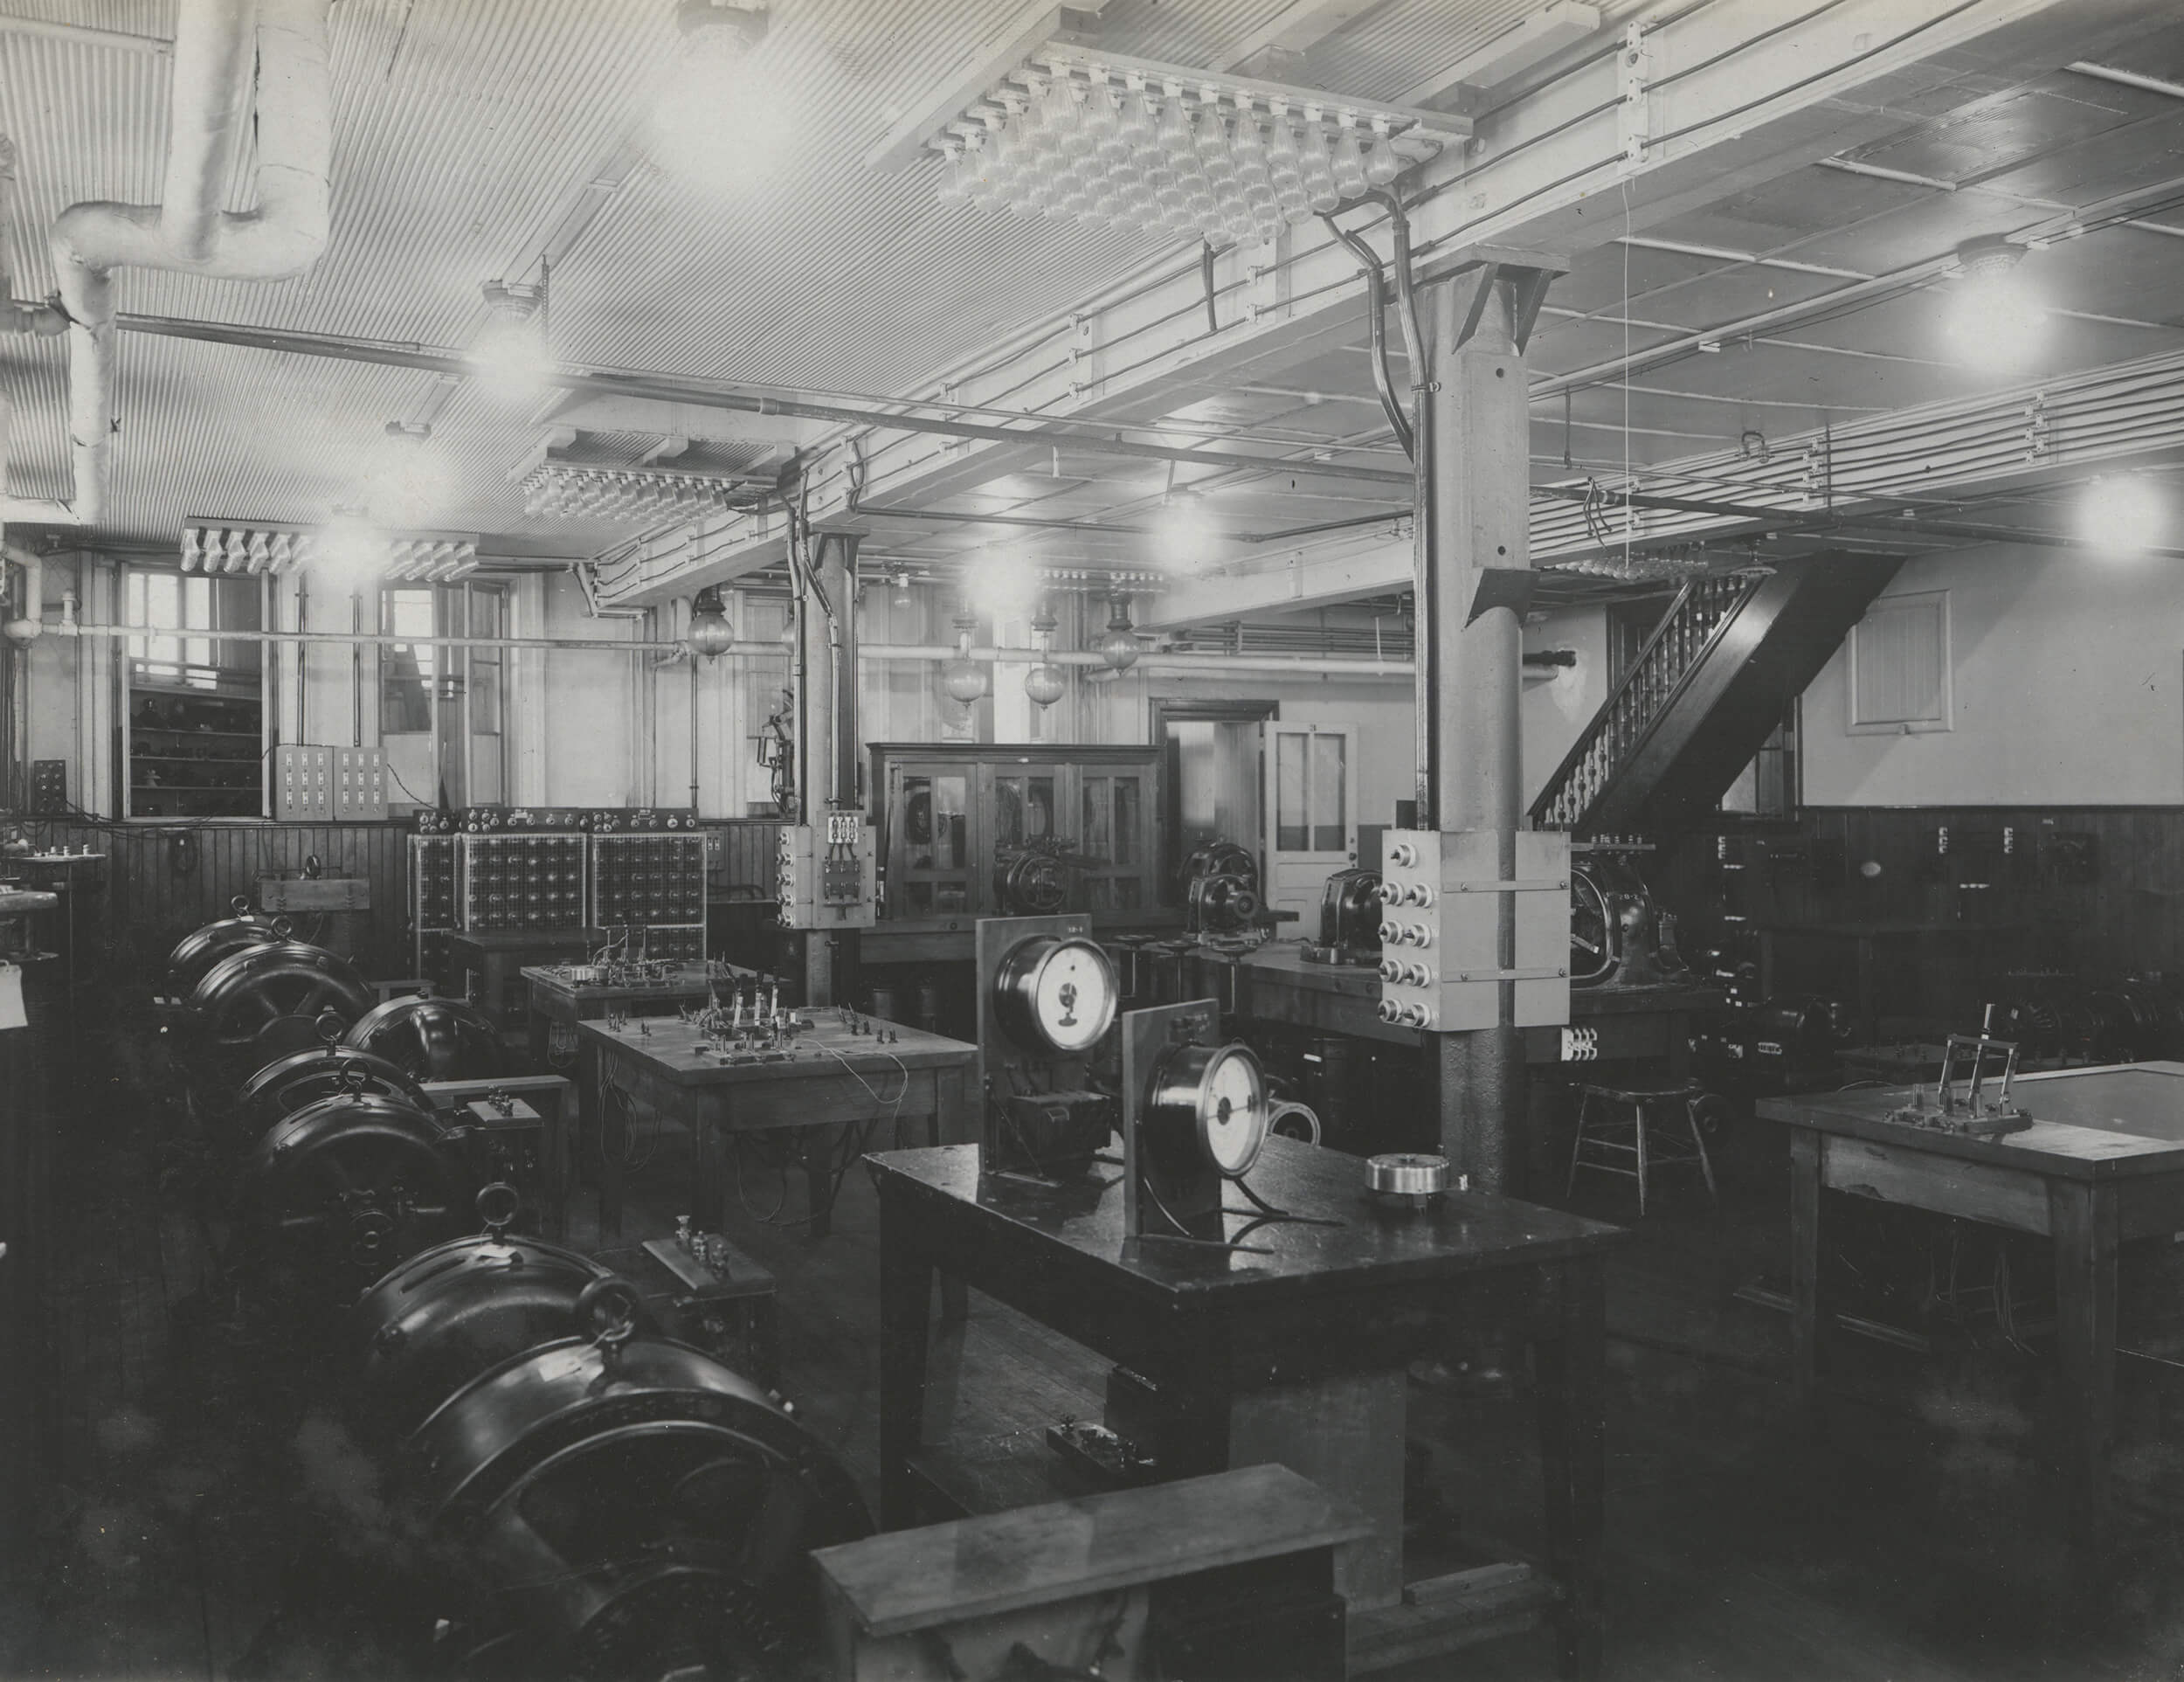 Electrical Machines in the Engineering Building, 1909